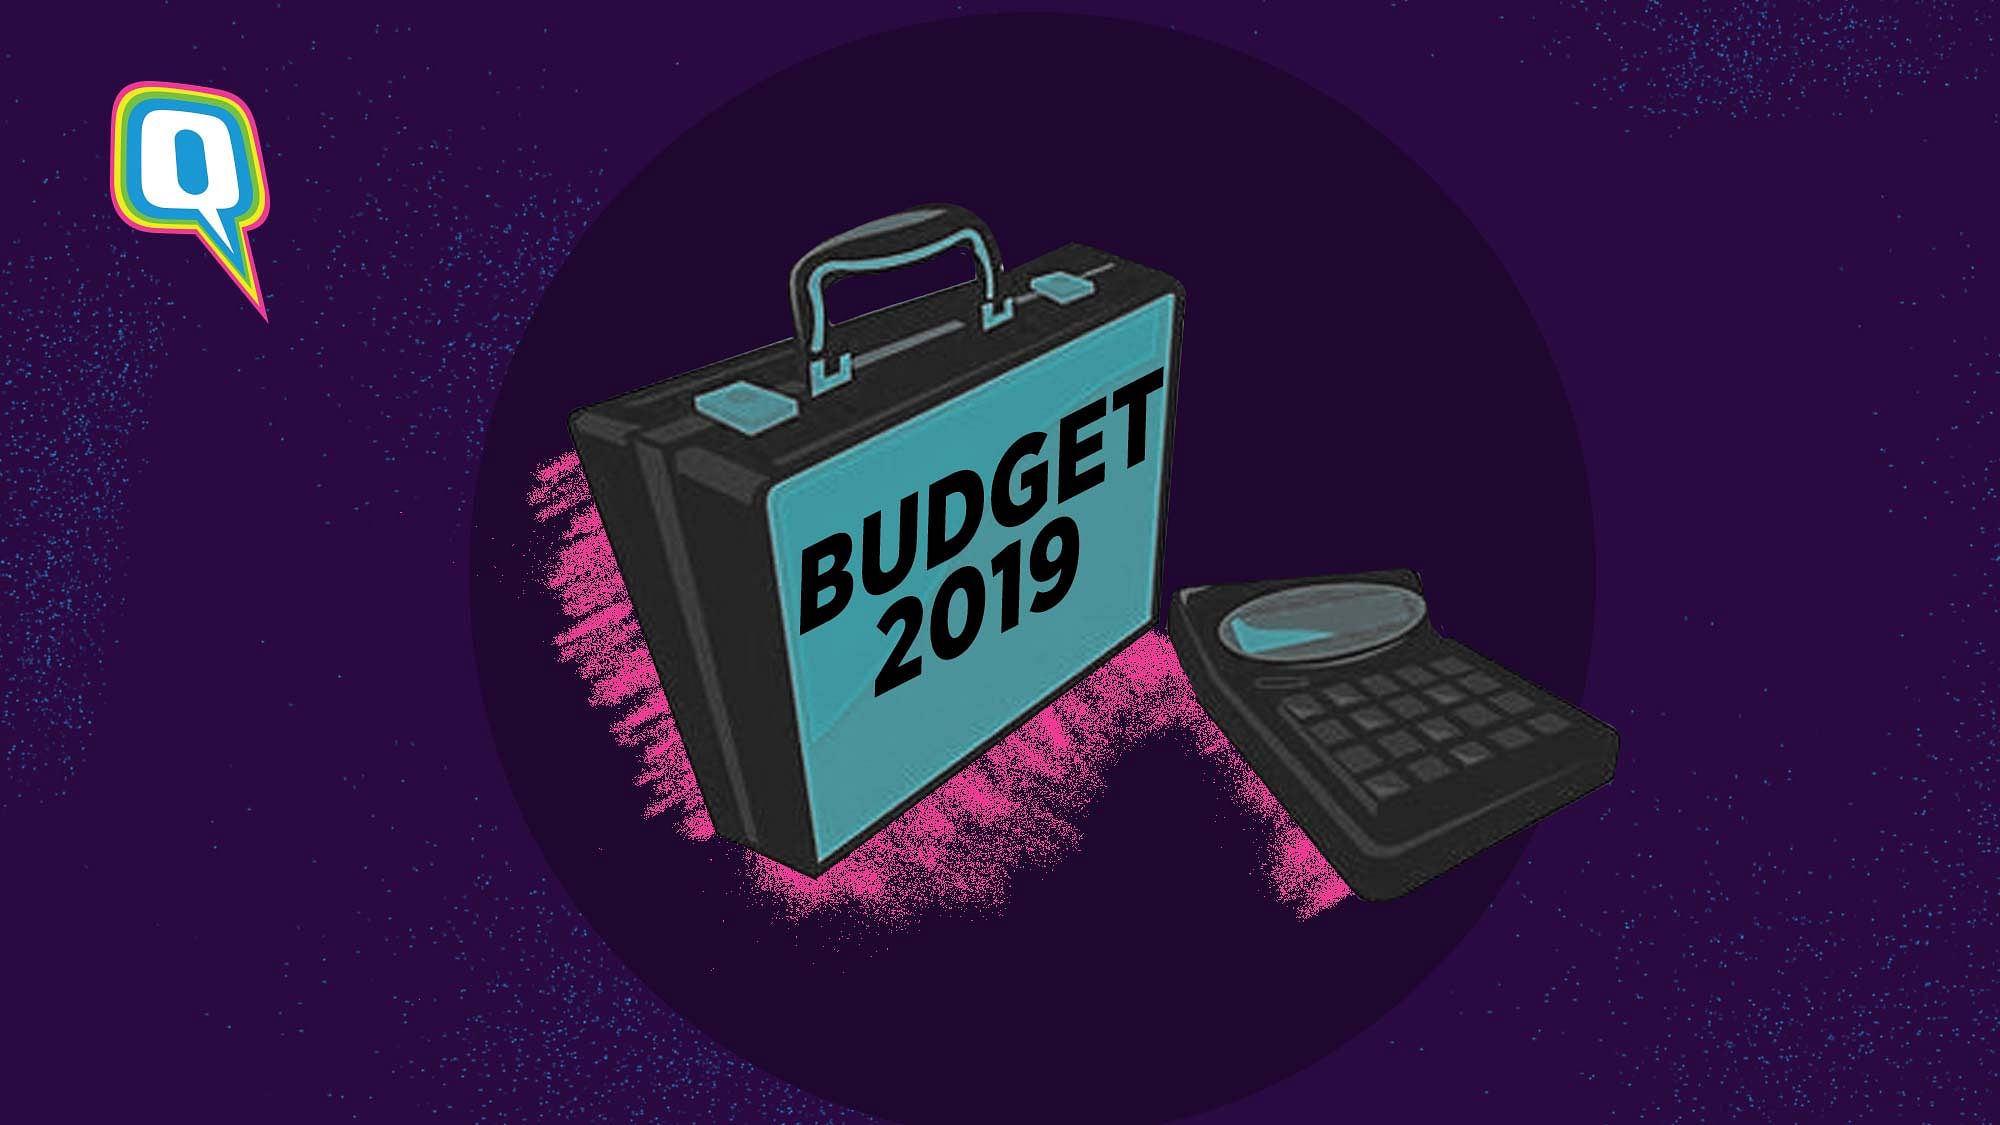 What do the millennials think of Budget 2019?